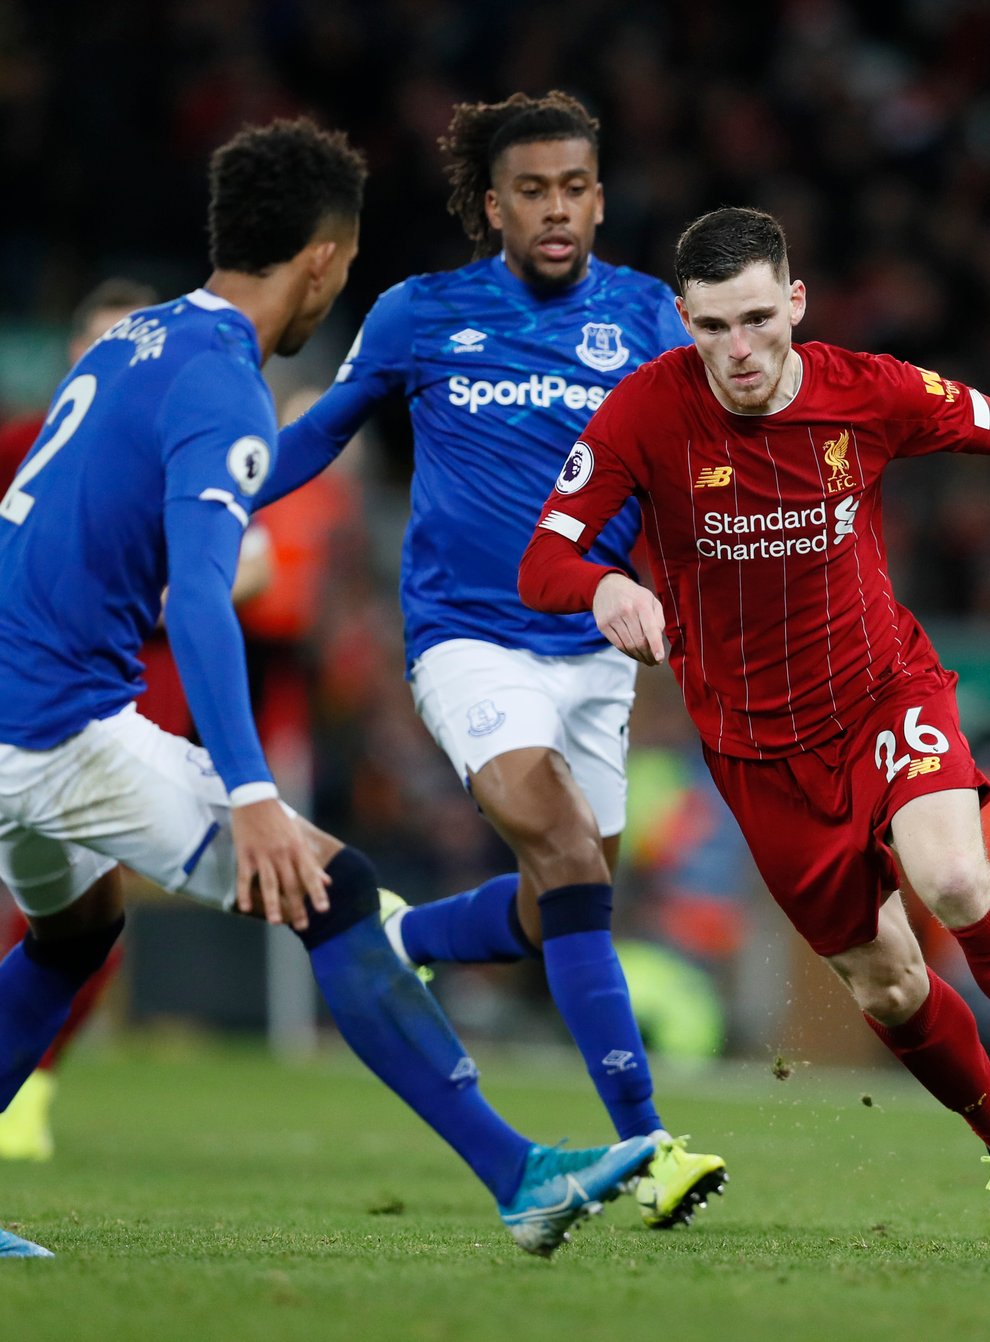 Everton will host Liverpool at Goodison Park